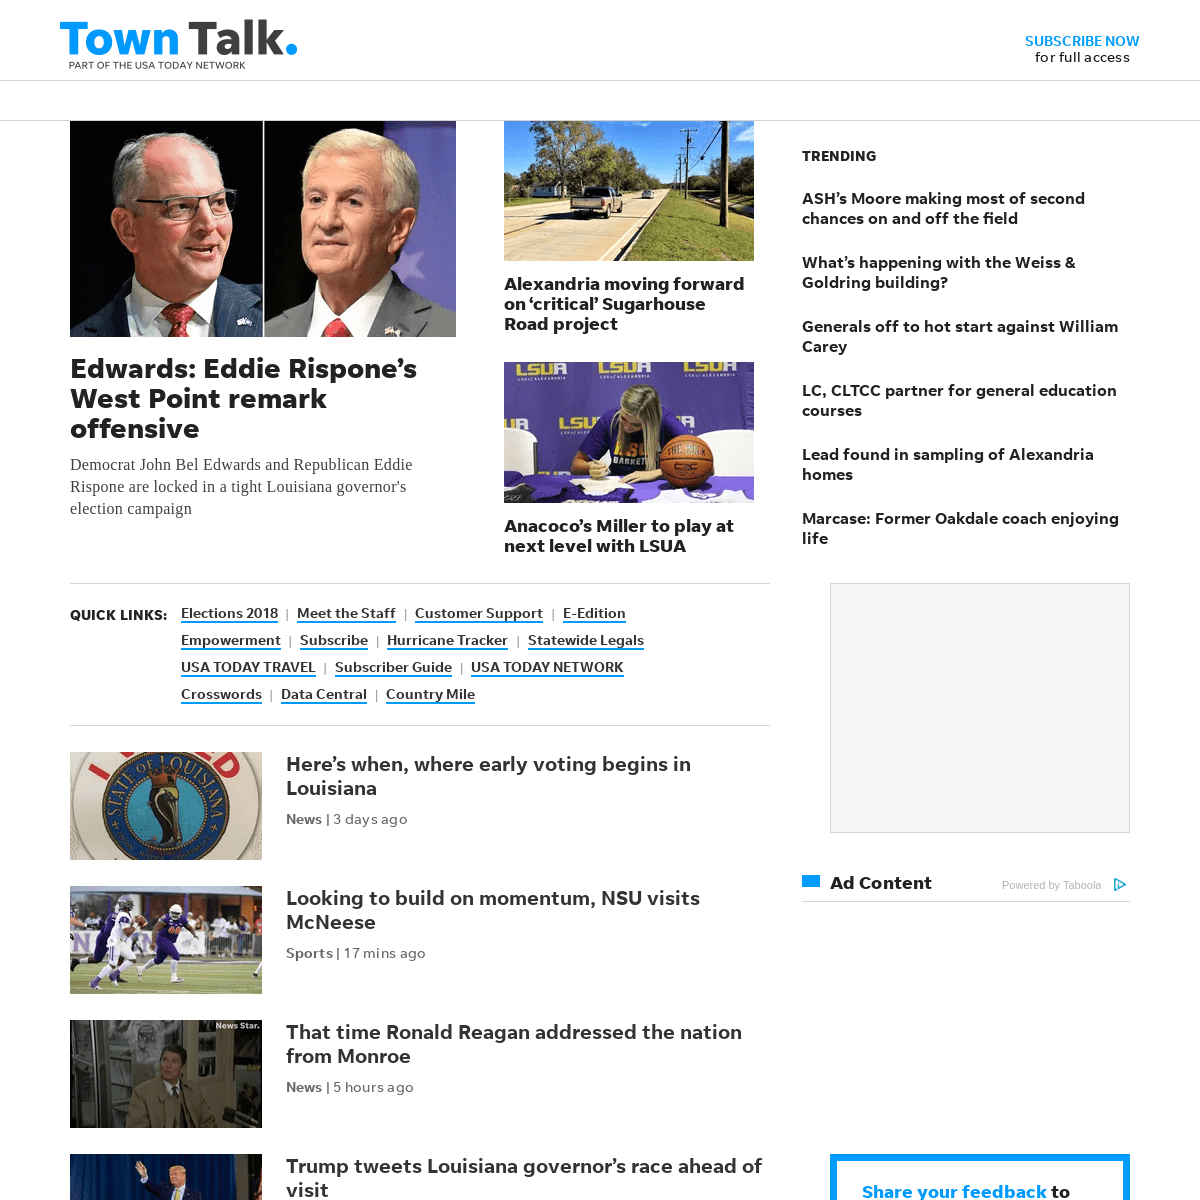 A complete backup of thetowntalk.com